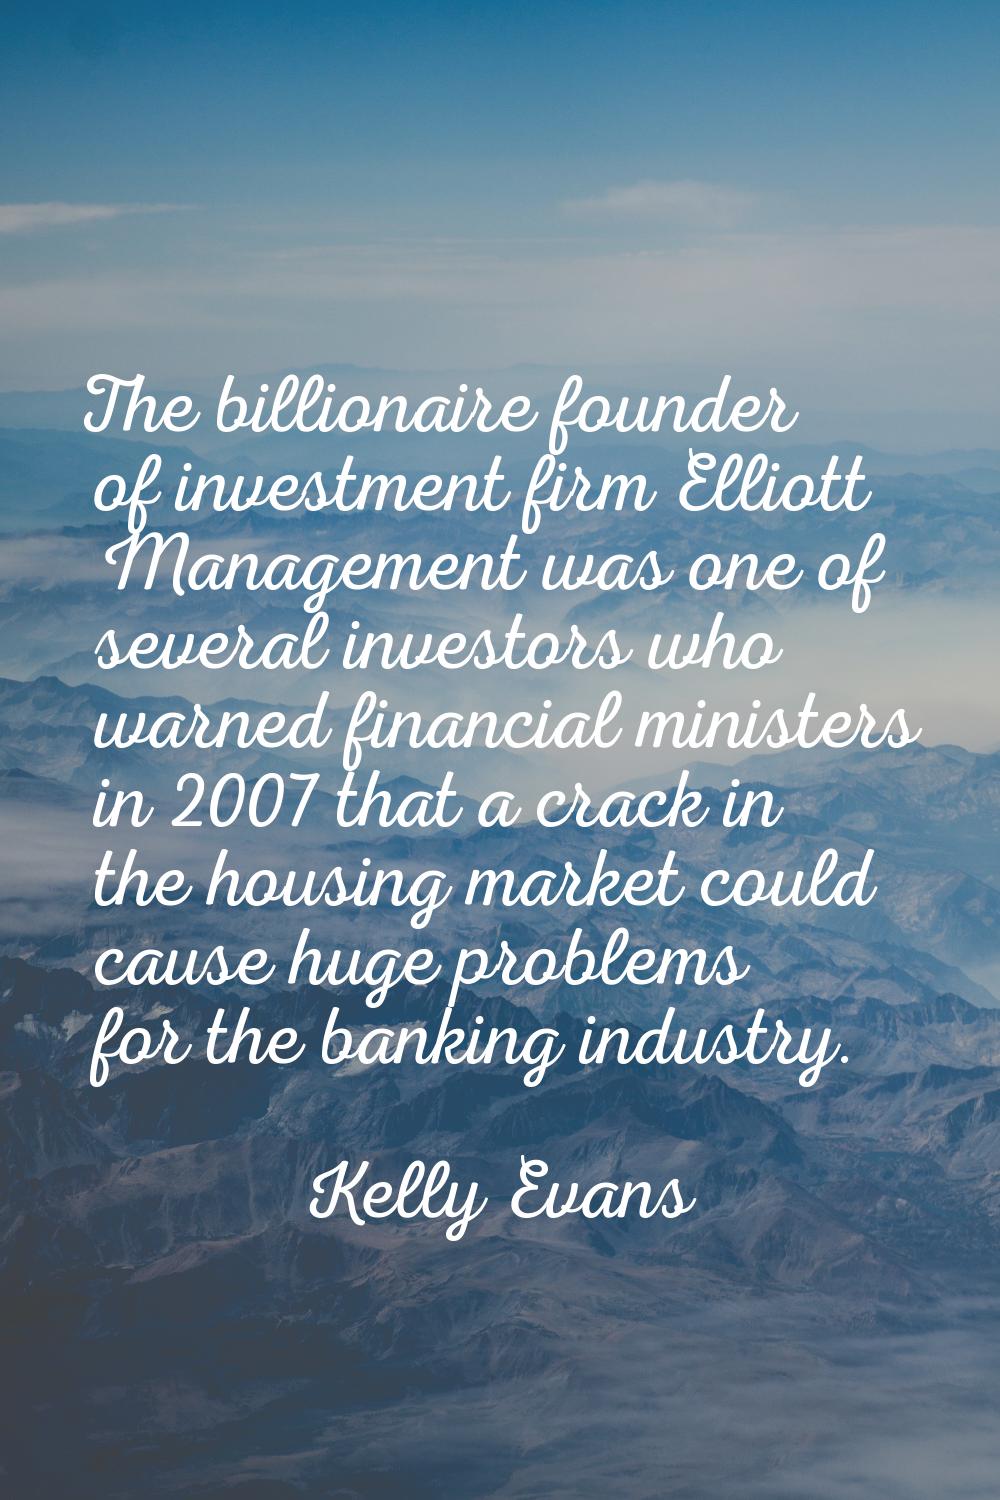 The billionaire founder of investment firm Elliott Management was one of several investors who warn